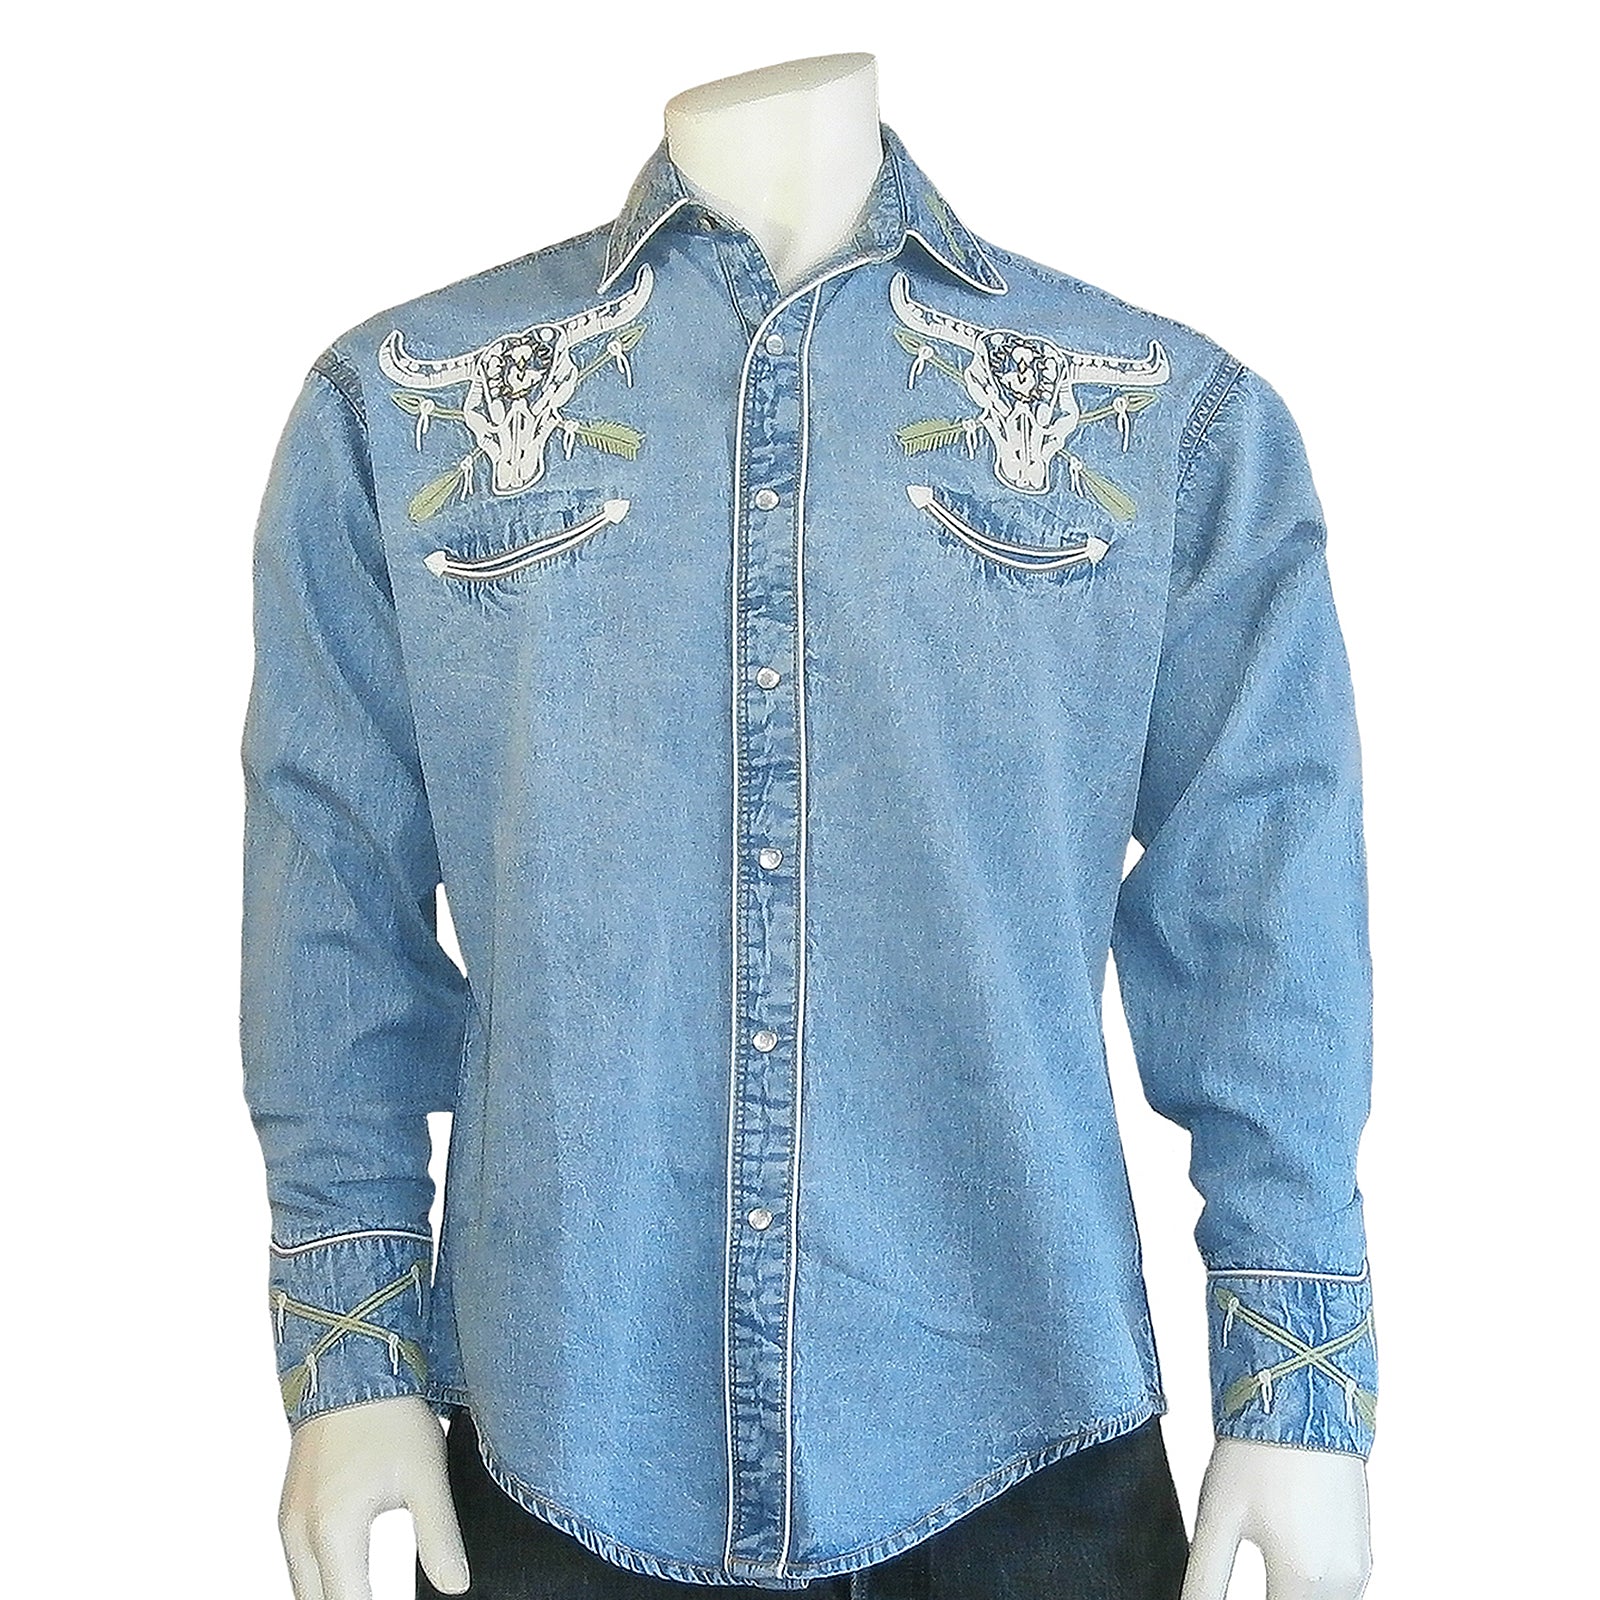 Hart N Dagger - Our denim work shirt can make any outfit look good. Shop  the look at http://www.hartndagger.com | Facebook